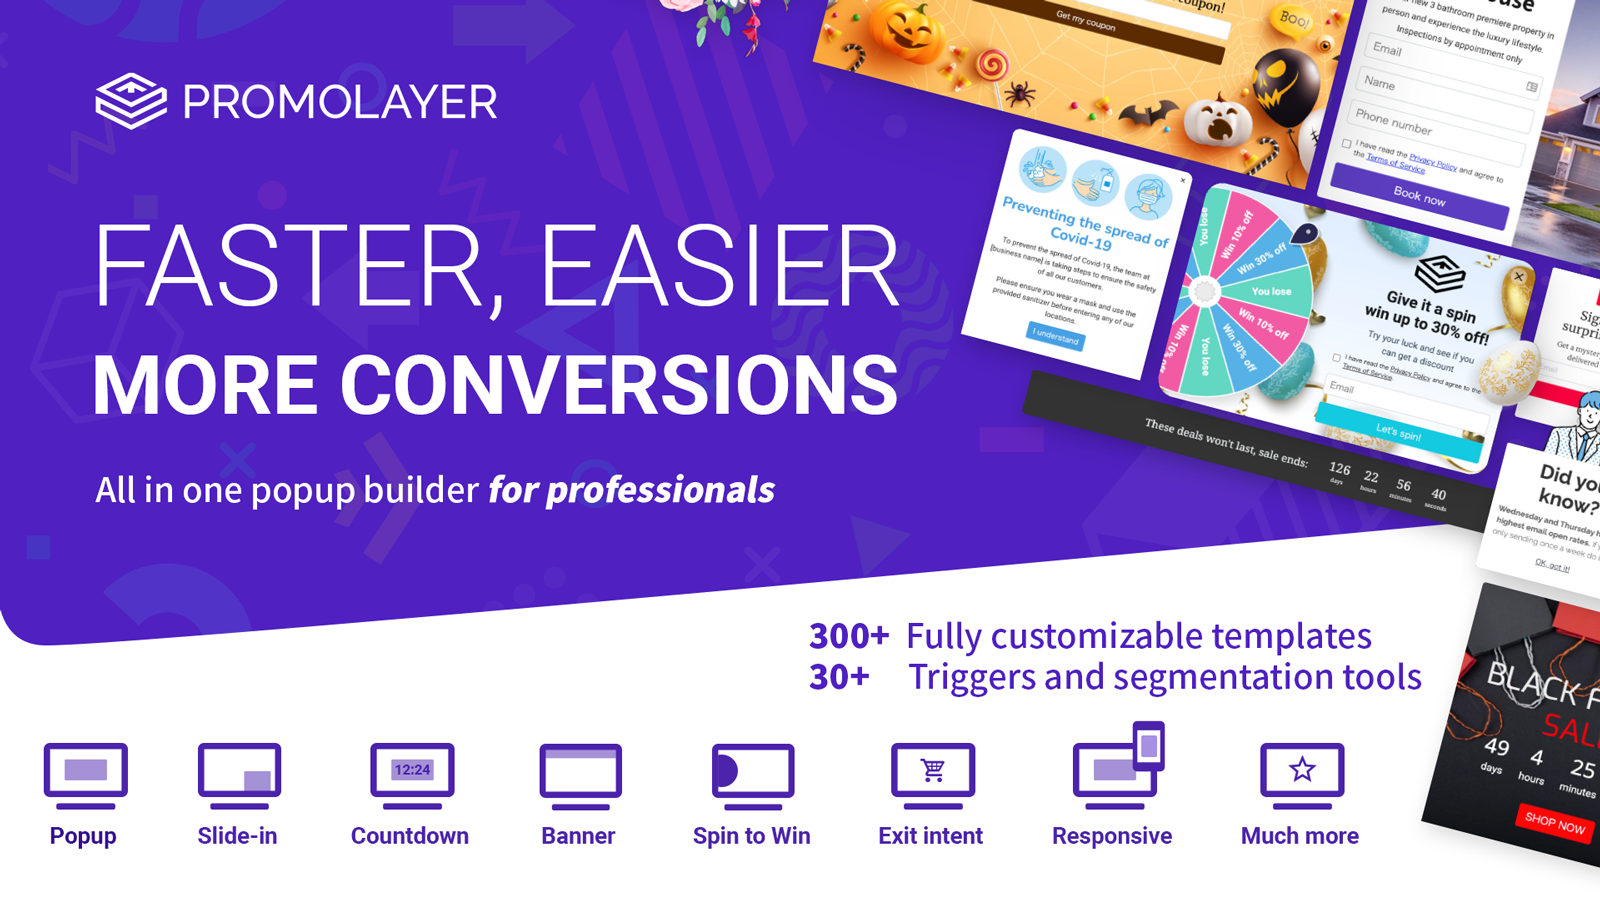 Promolayer All in one popups and email capture for pros